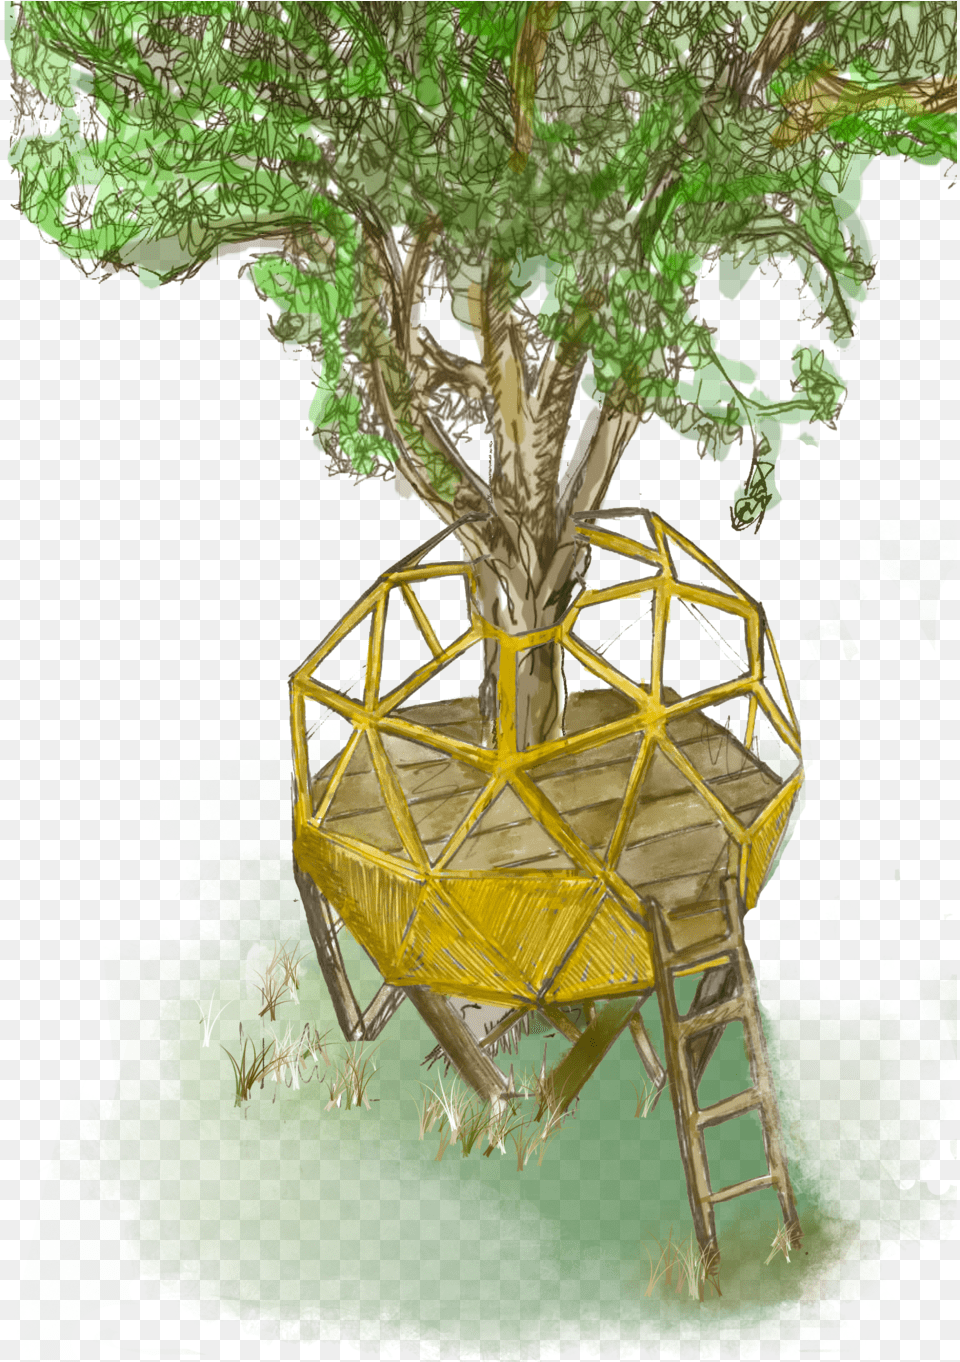 Download Treehouse Image With No Tree House, Architecture, Tree House, Housing, Green Free Transparent Png